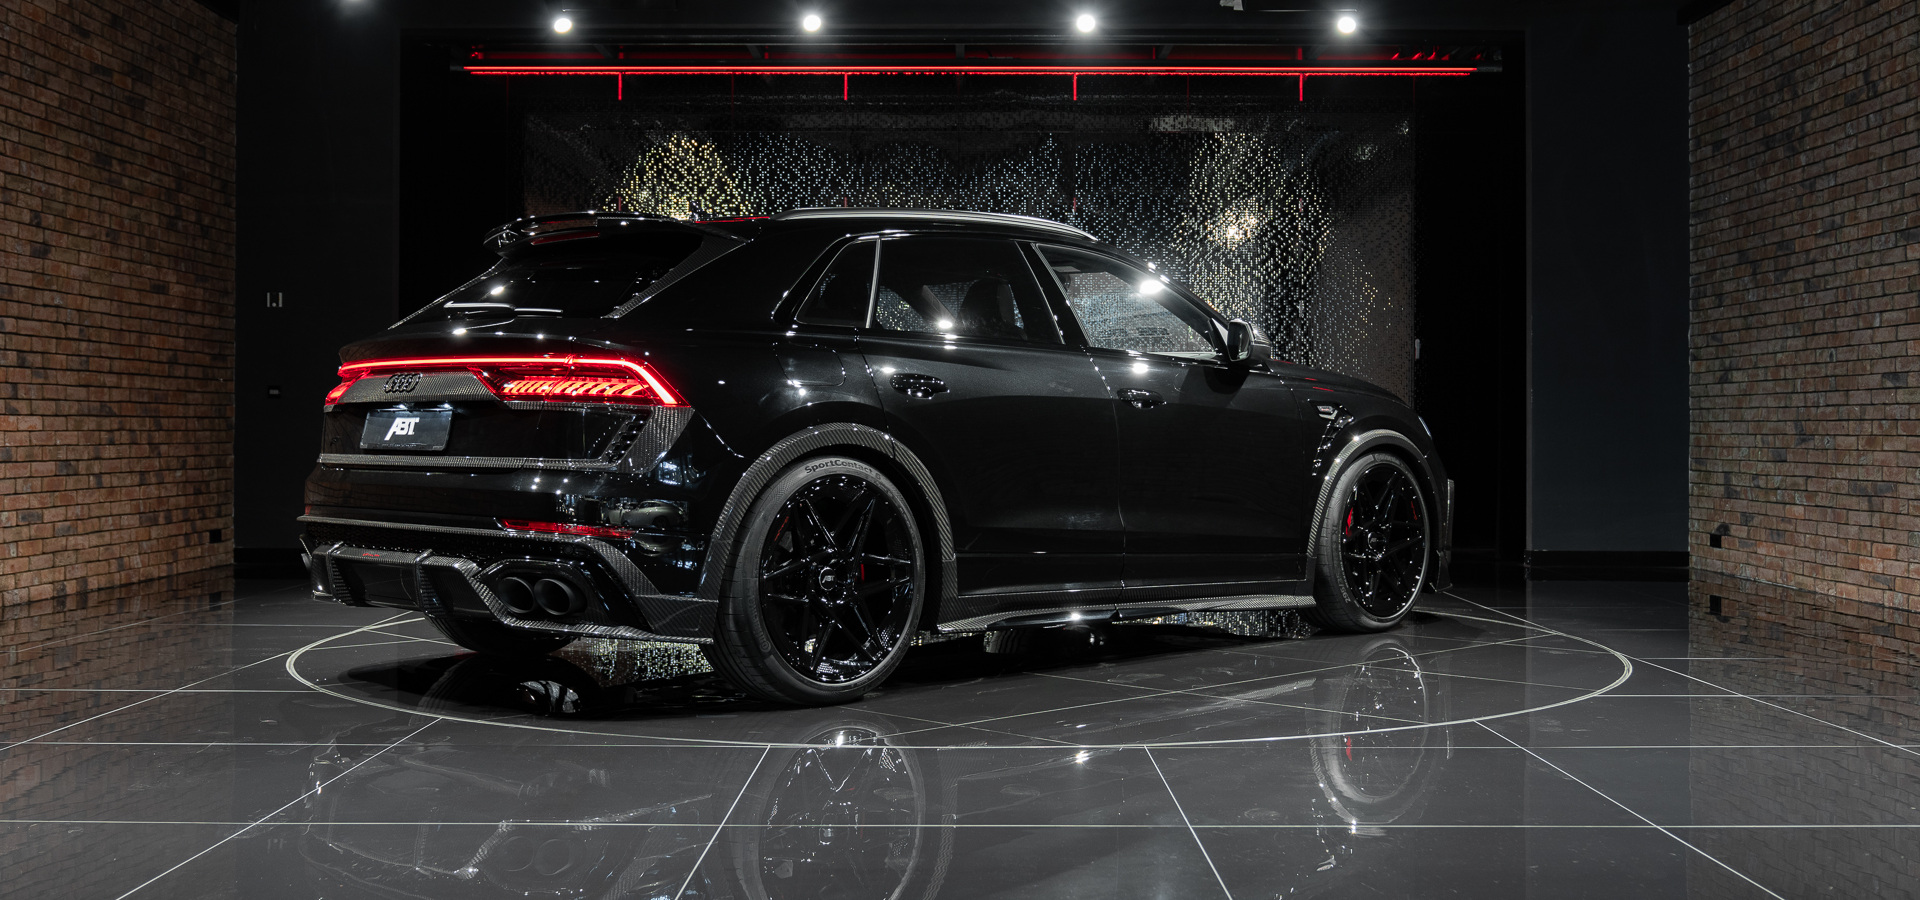 Perfect finish for RSQ8 Signature Edition” 800 HP Racing Utility